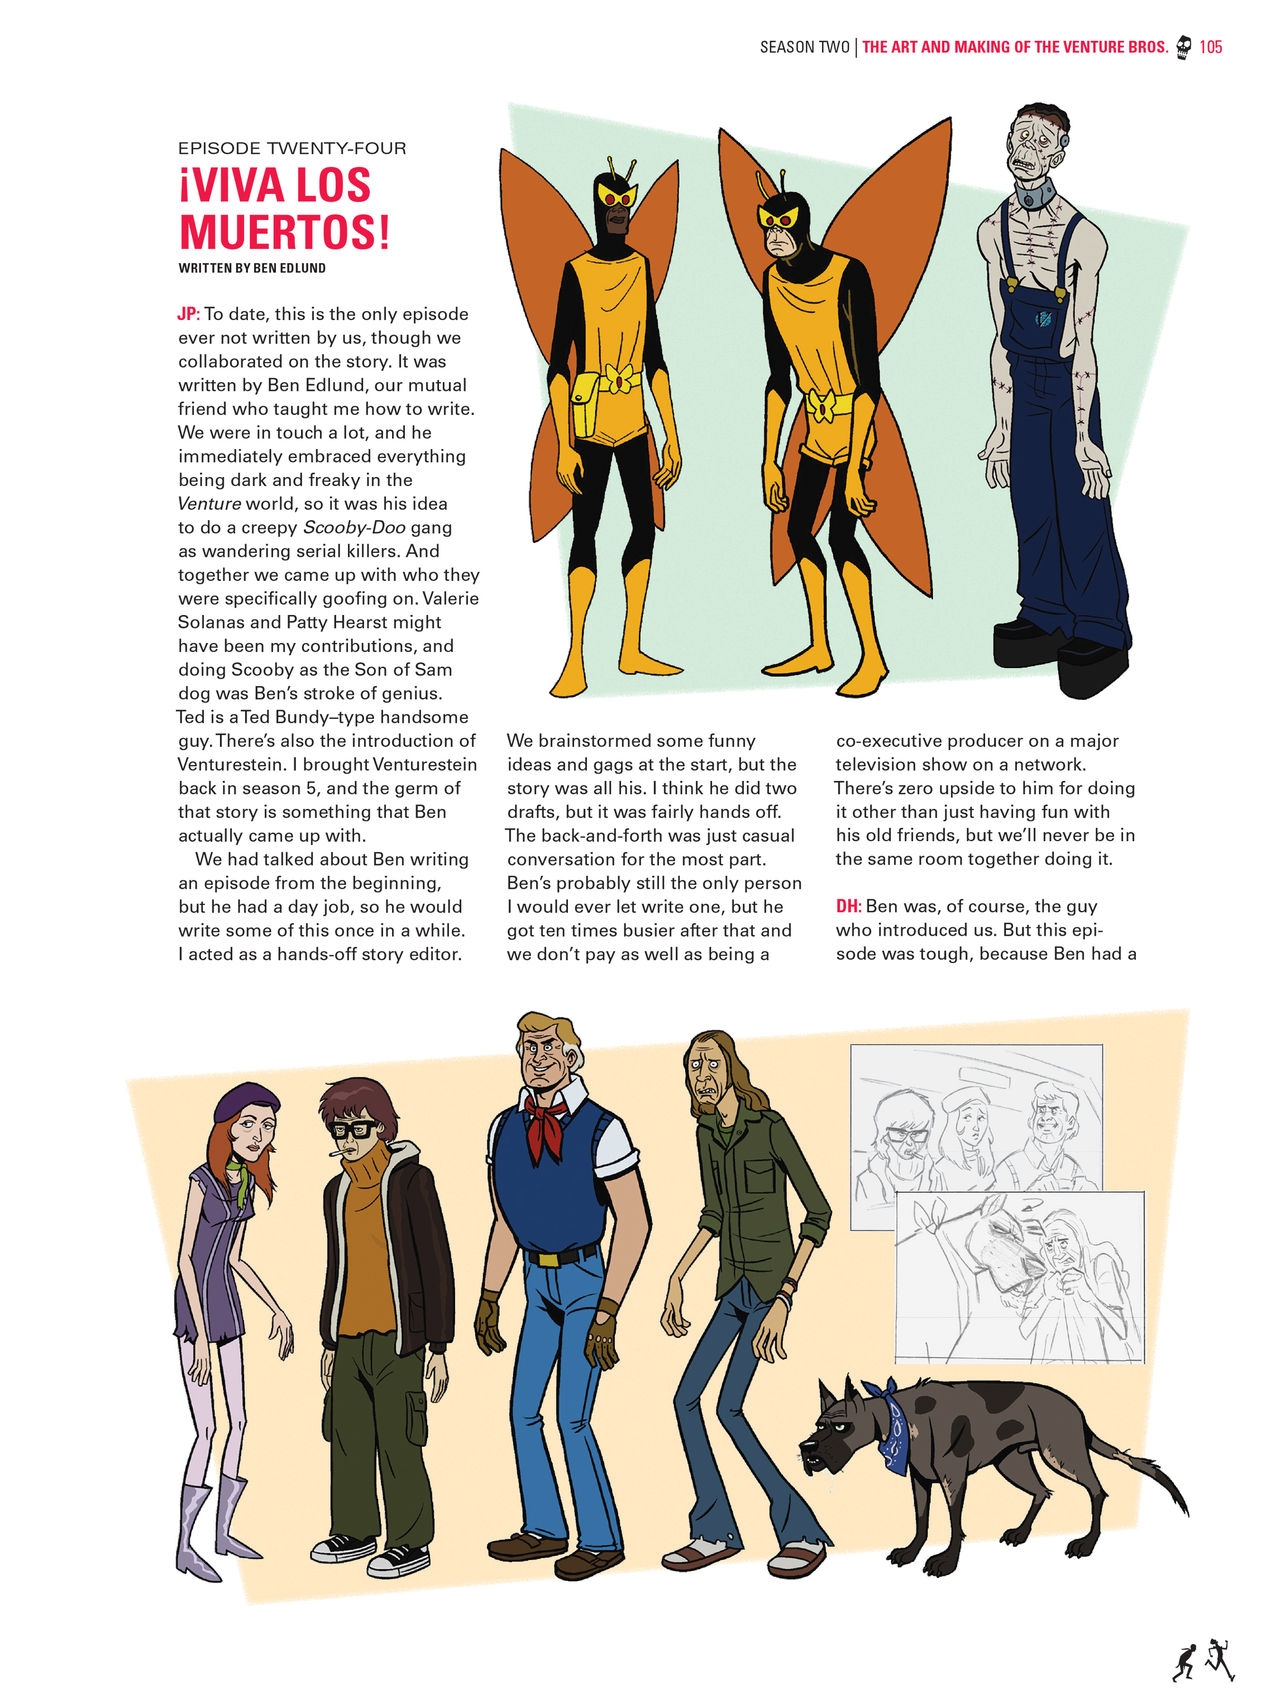 Go Team Venture! - The Art and Making of the Venture Bros 104